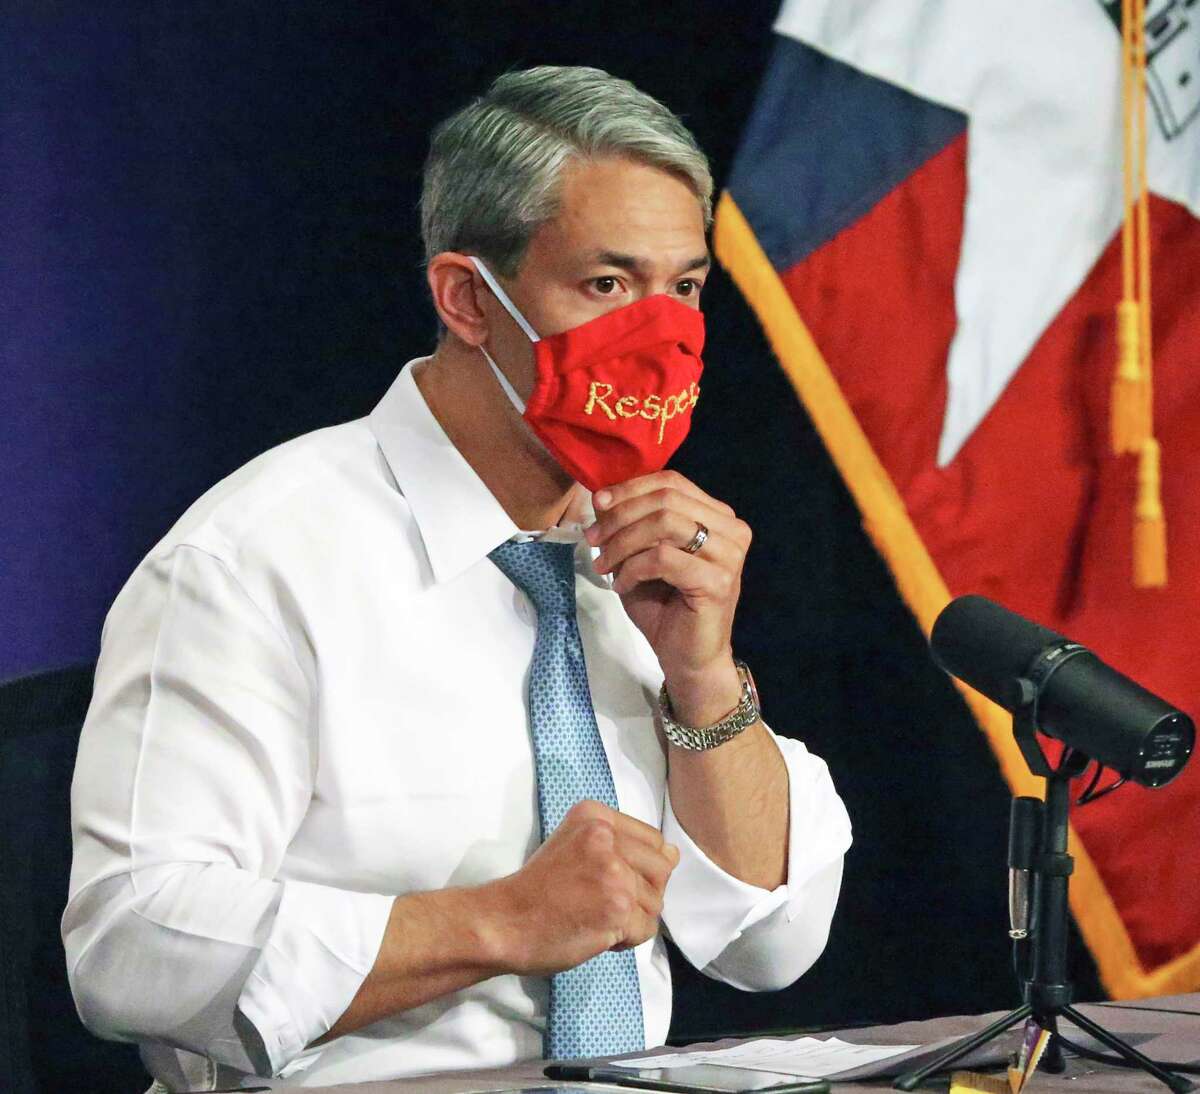 Mayor Ron Nirenberg has discussed his concern about the rising number of coronavirus cases and the stress that has placed on San Antonio hospital systems. He and Bexar County Judge Nelson Wolff regularly urge the public to wear face masks to protect themselves from the virus.